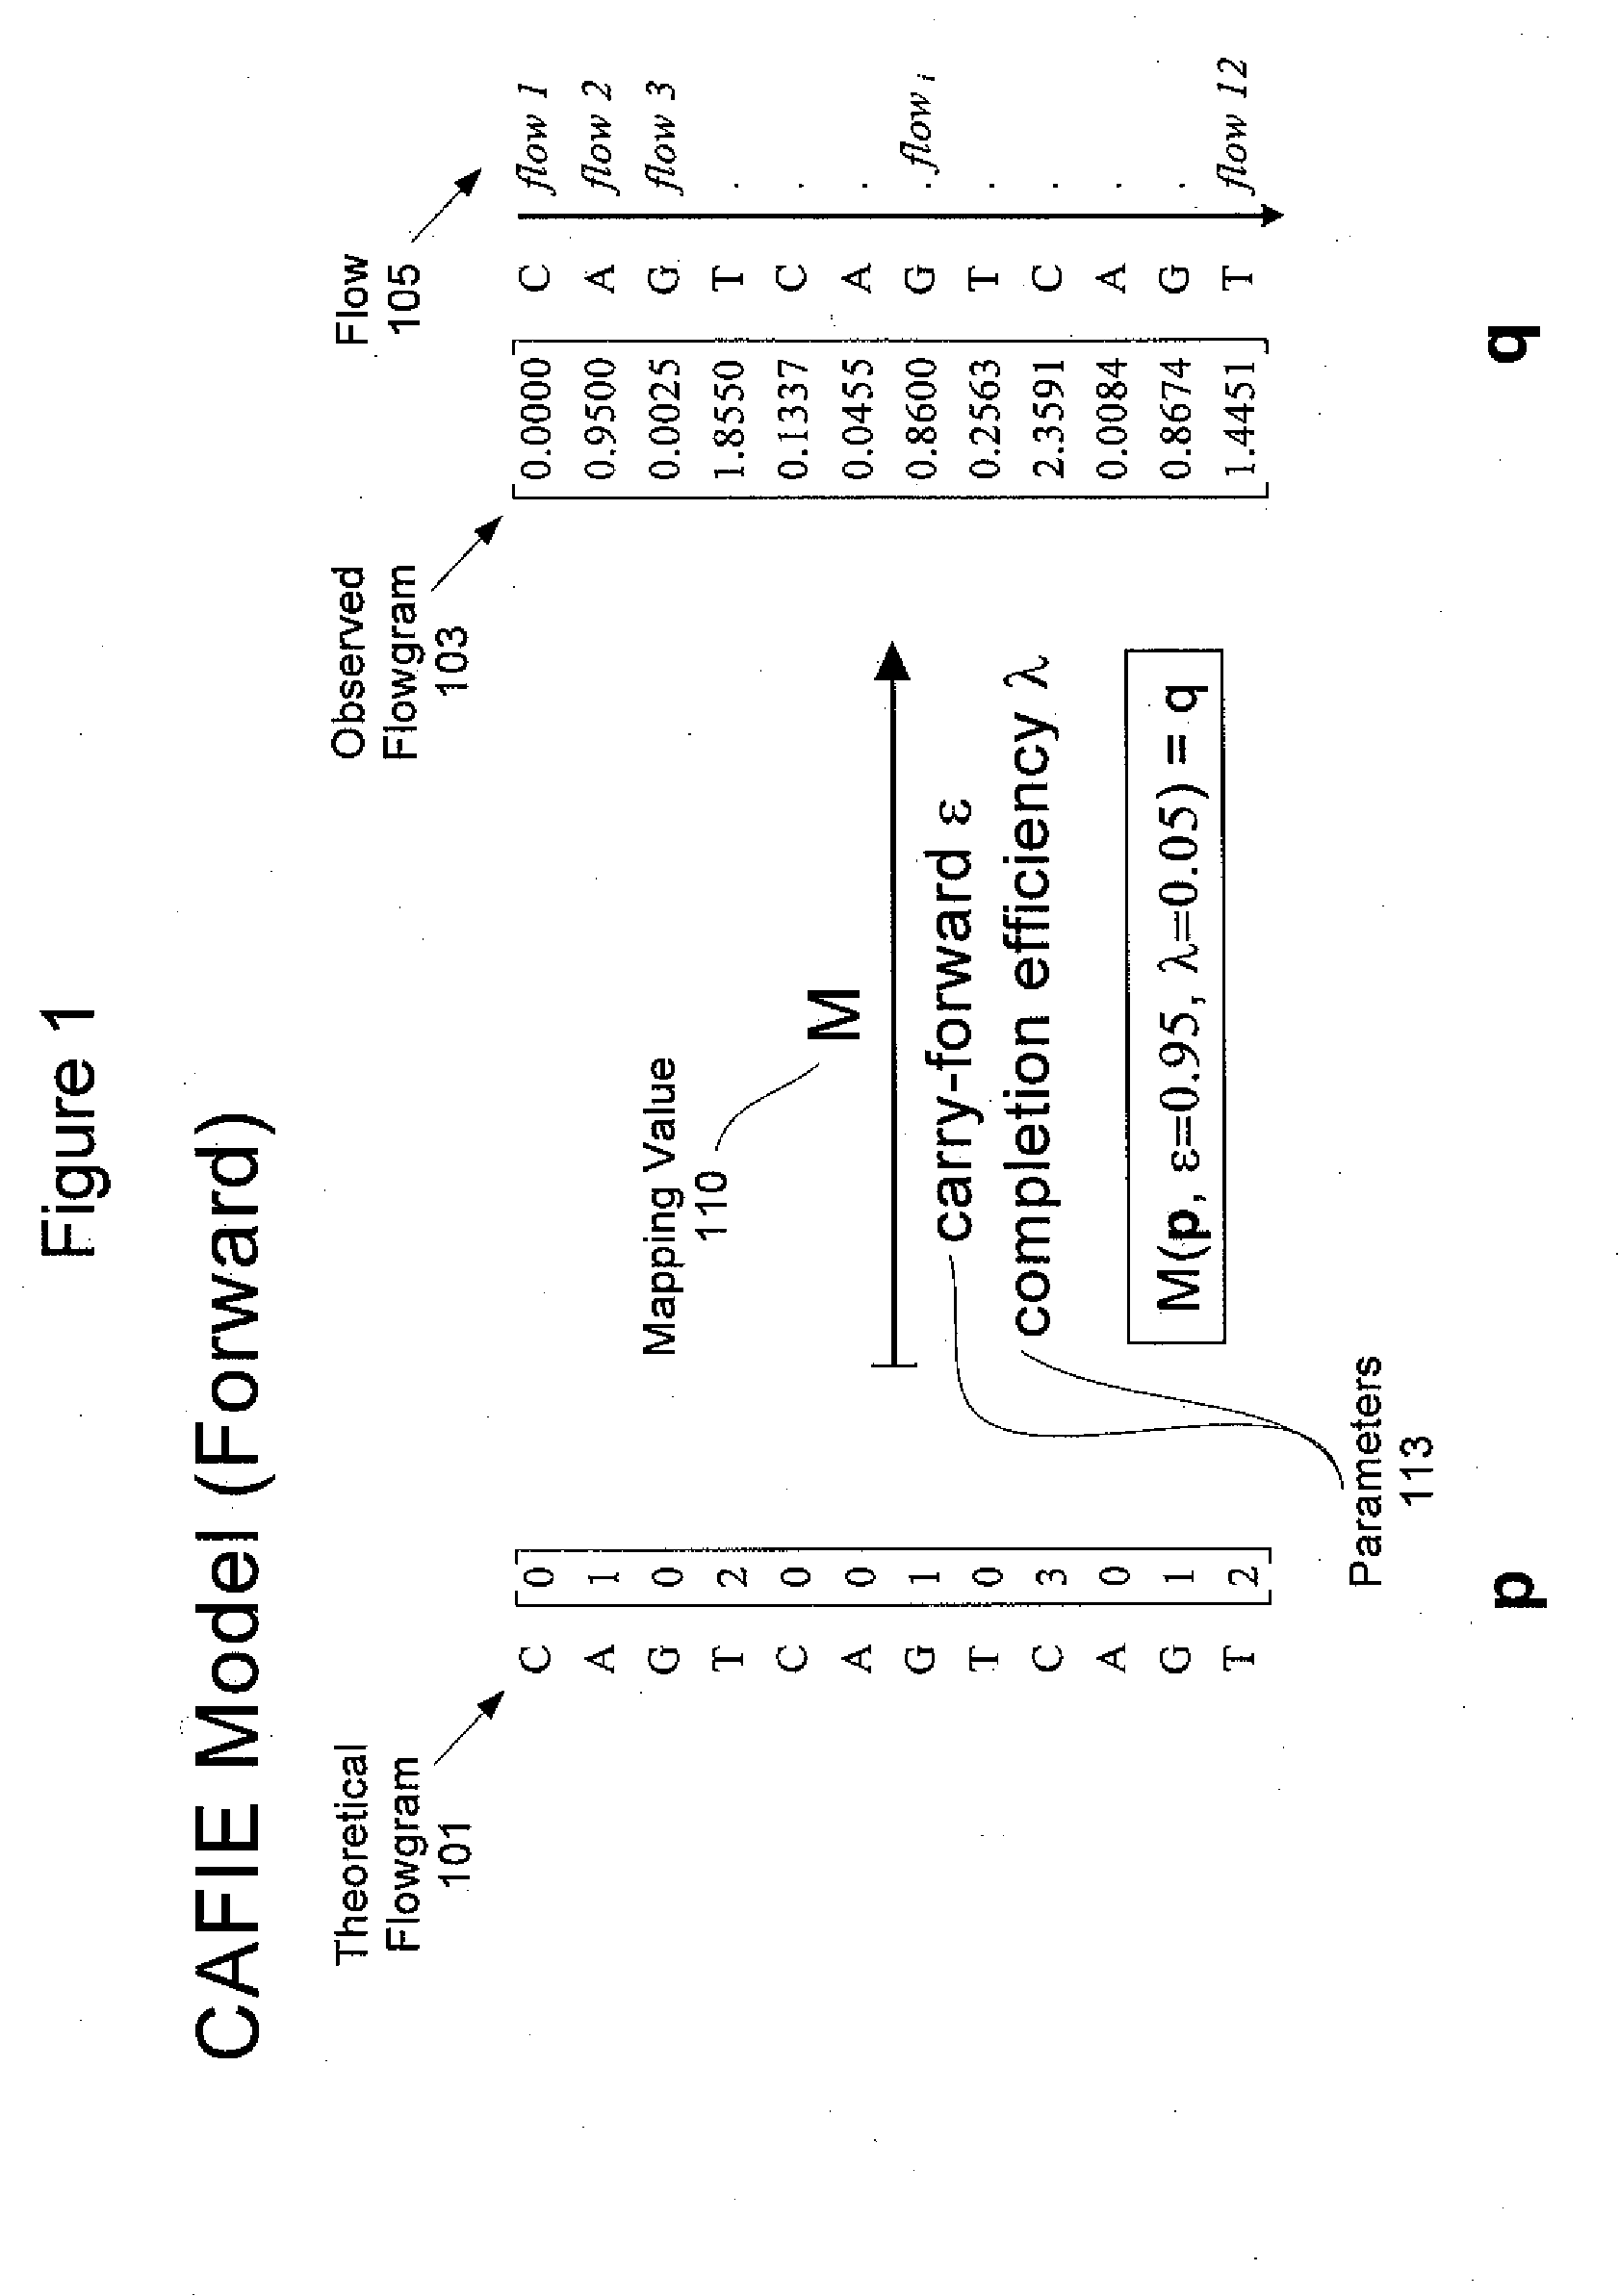 System and method to correct out of phase errors in DNA sequencing data by use of a recursive algorithm